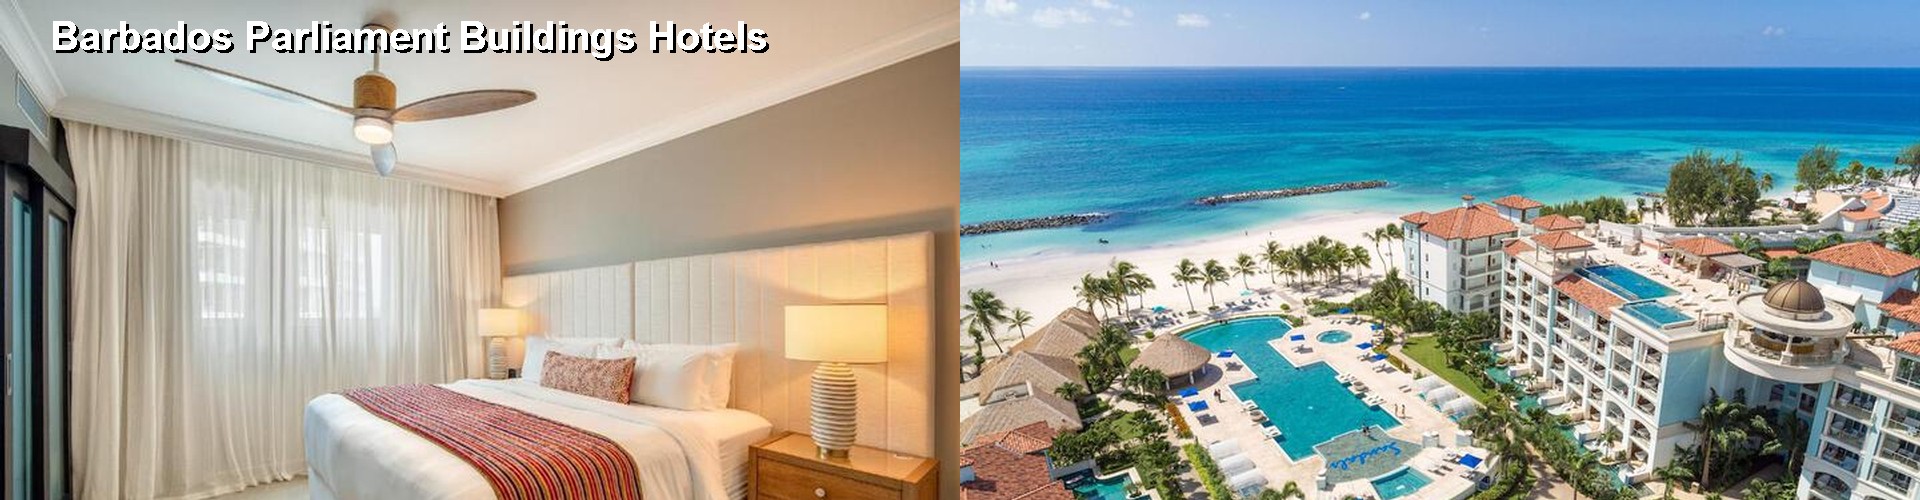 5 Best Hotels near Barbados Parliament Buildings